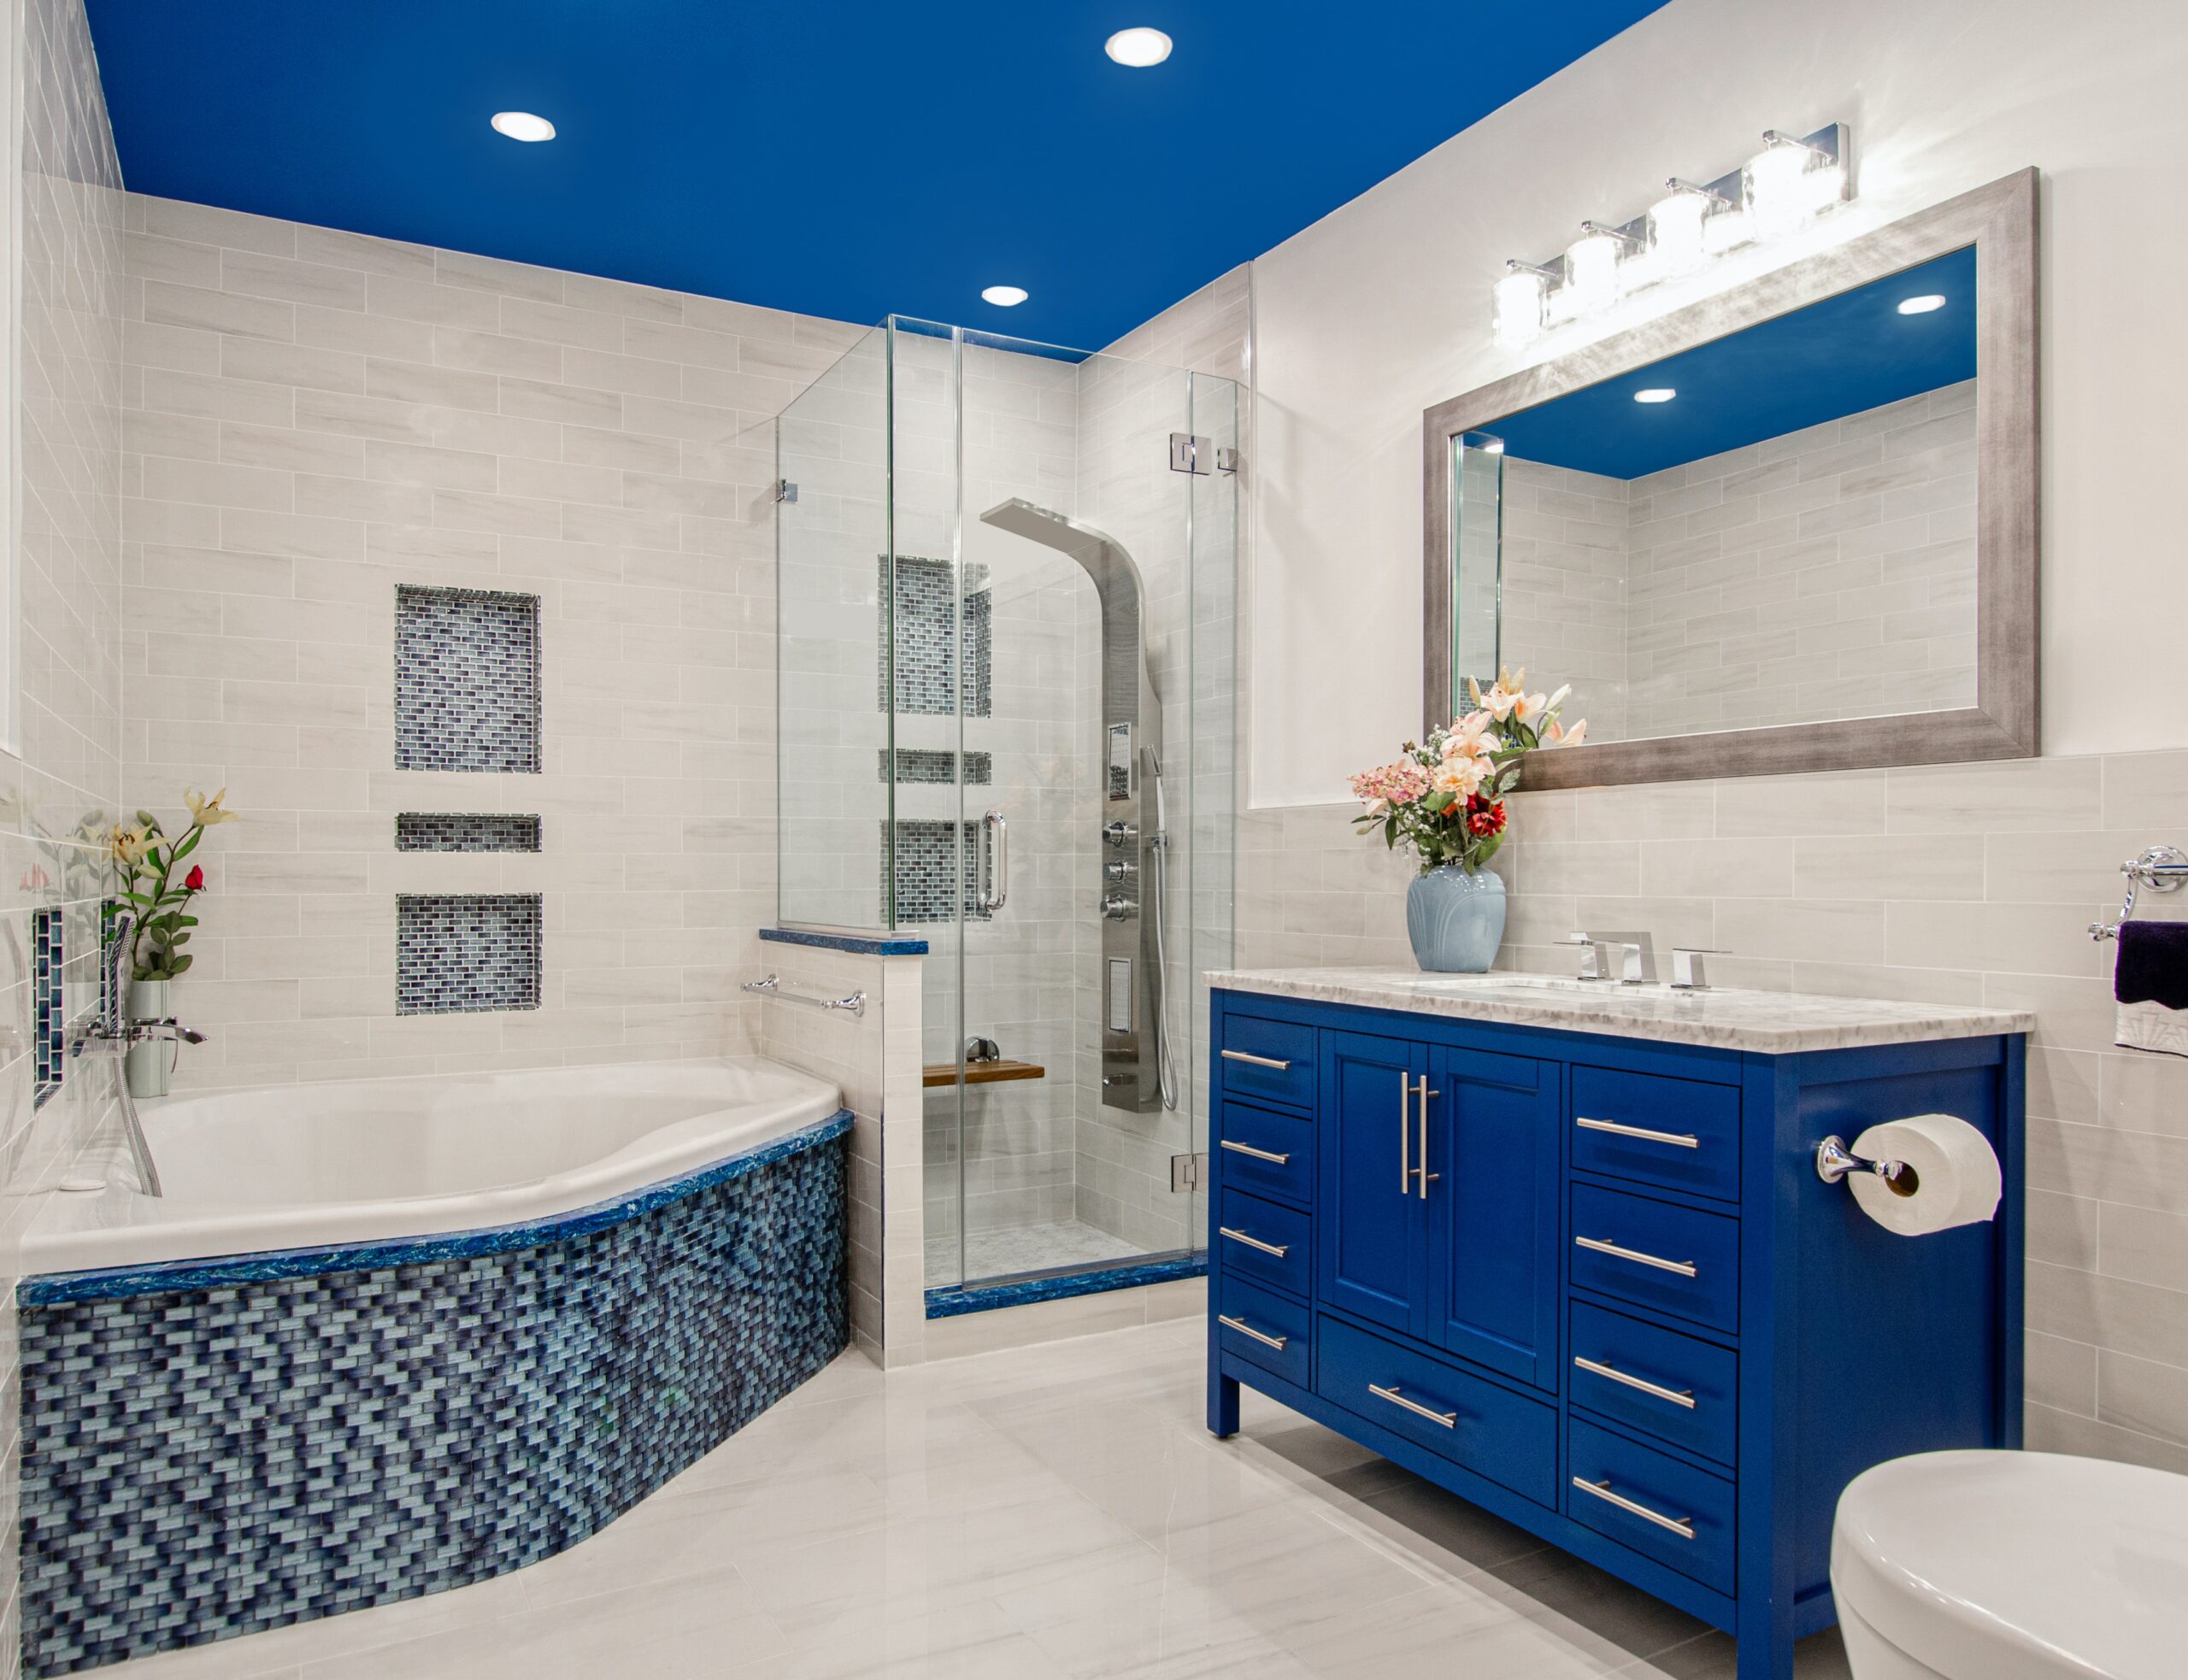 Add color to your boho bathroom to brighten it up. Pictured: A blue bathroom.